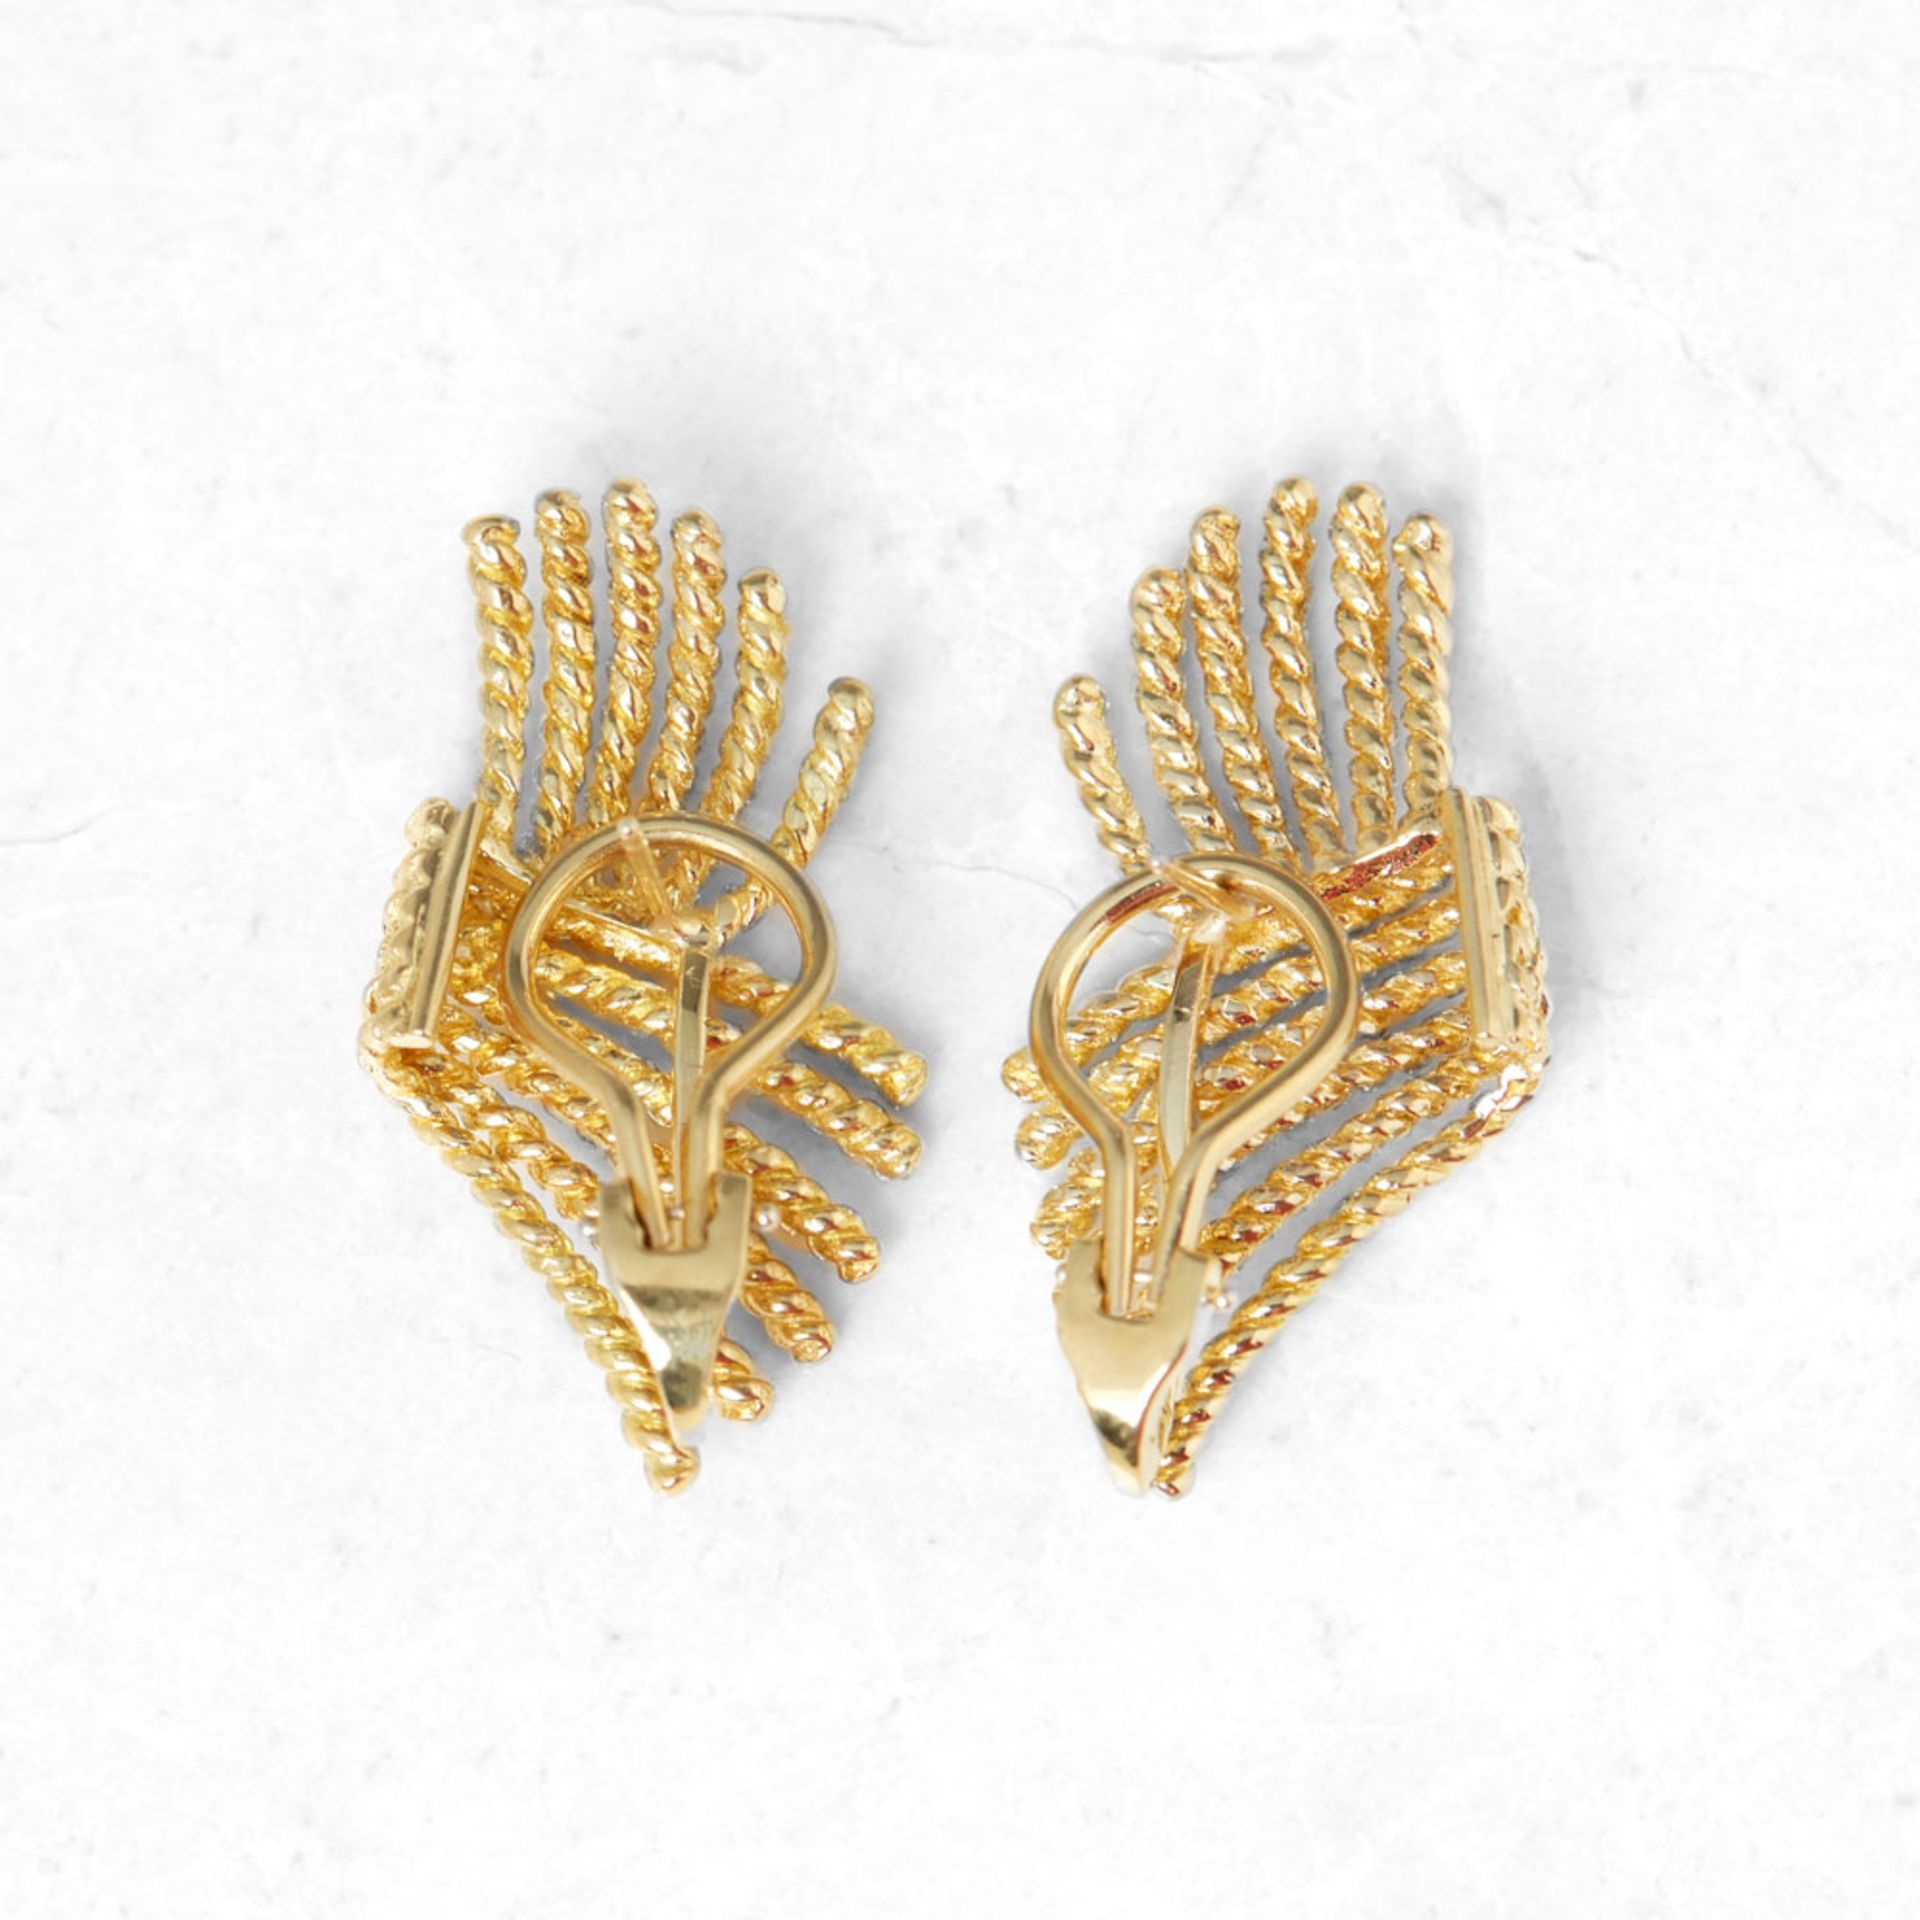 Tiffany & Co. 18k Yellow Gold Rope Design Schlumberger Earrings - Image 2 of 5